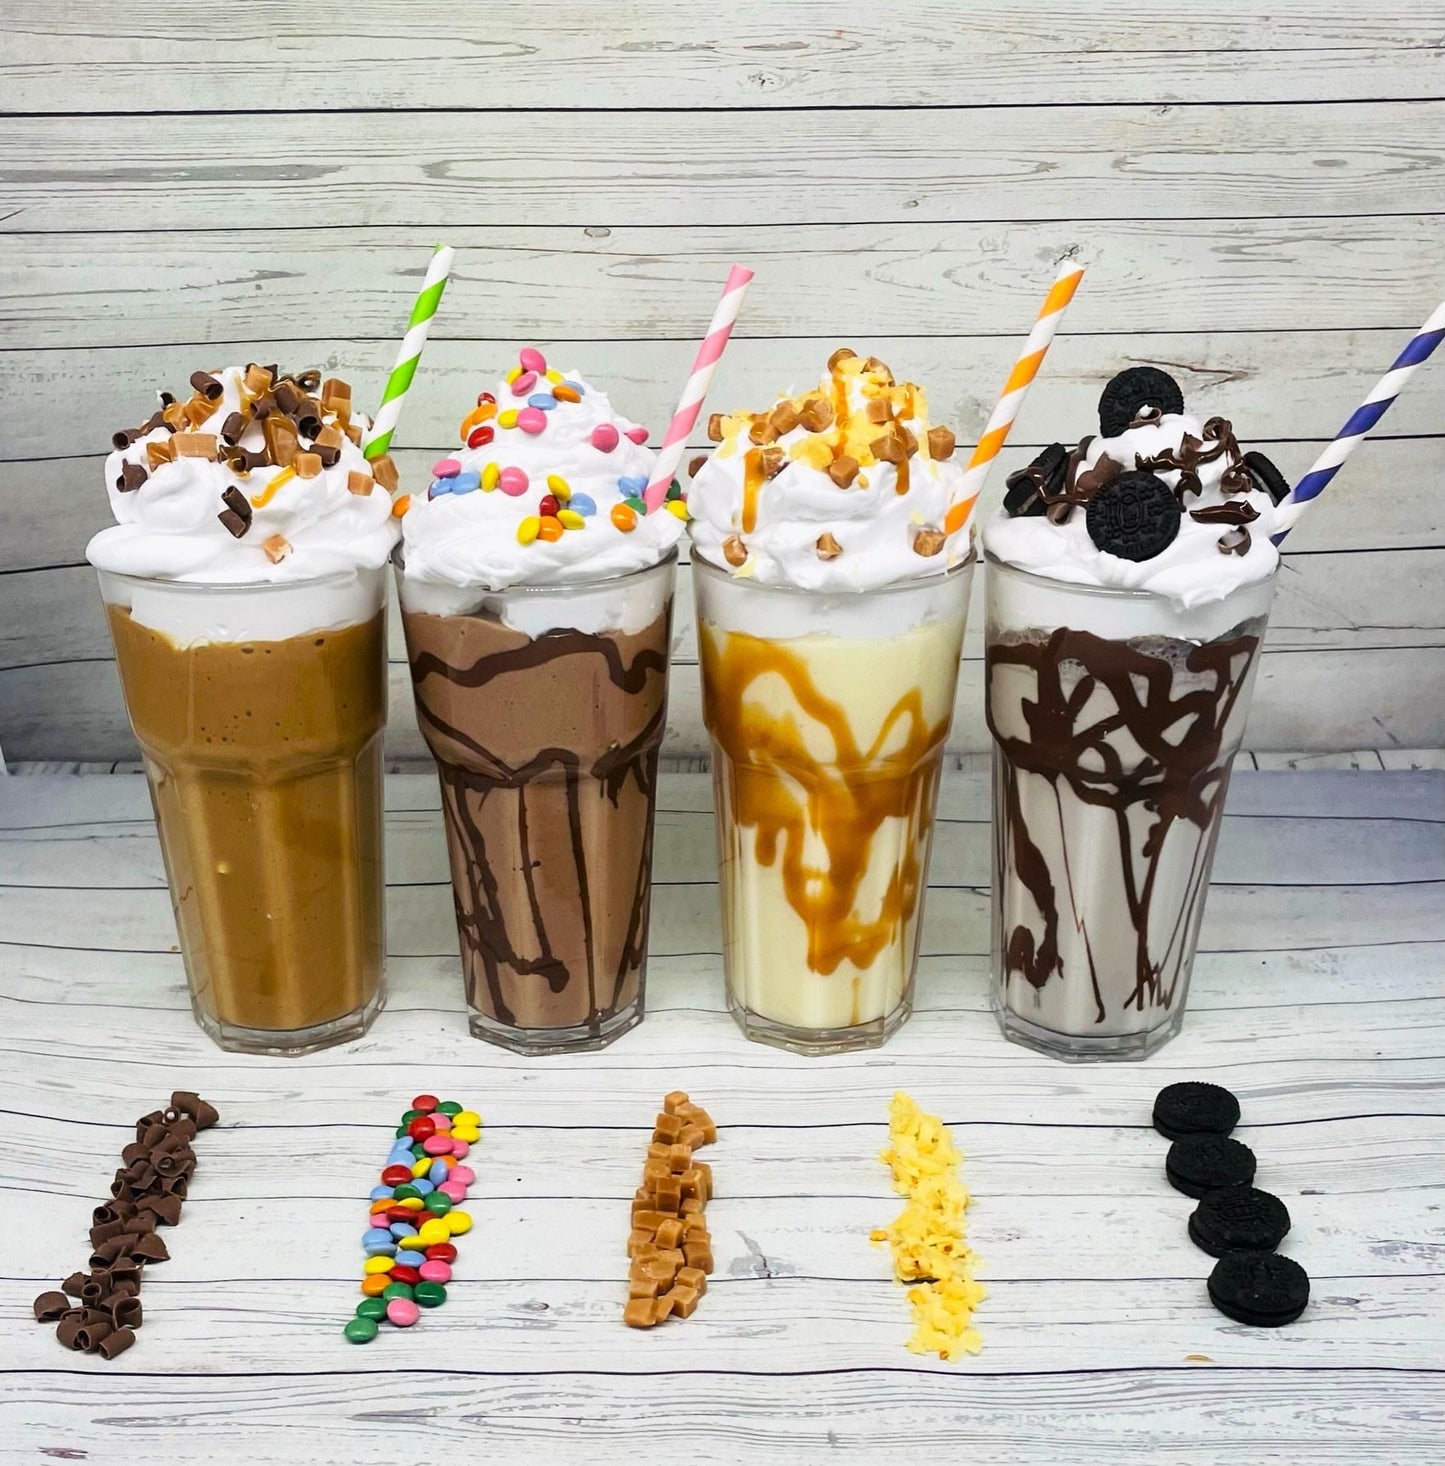 NEW Luxury Frappe Gift Box, Make luxury Frappes, Sauces and Toppings,  Birthday Gift, Chocolate Hamper, Iced Coffees, Easter Gift, Teen